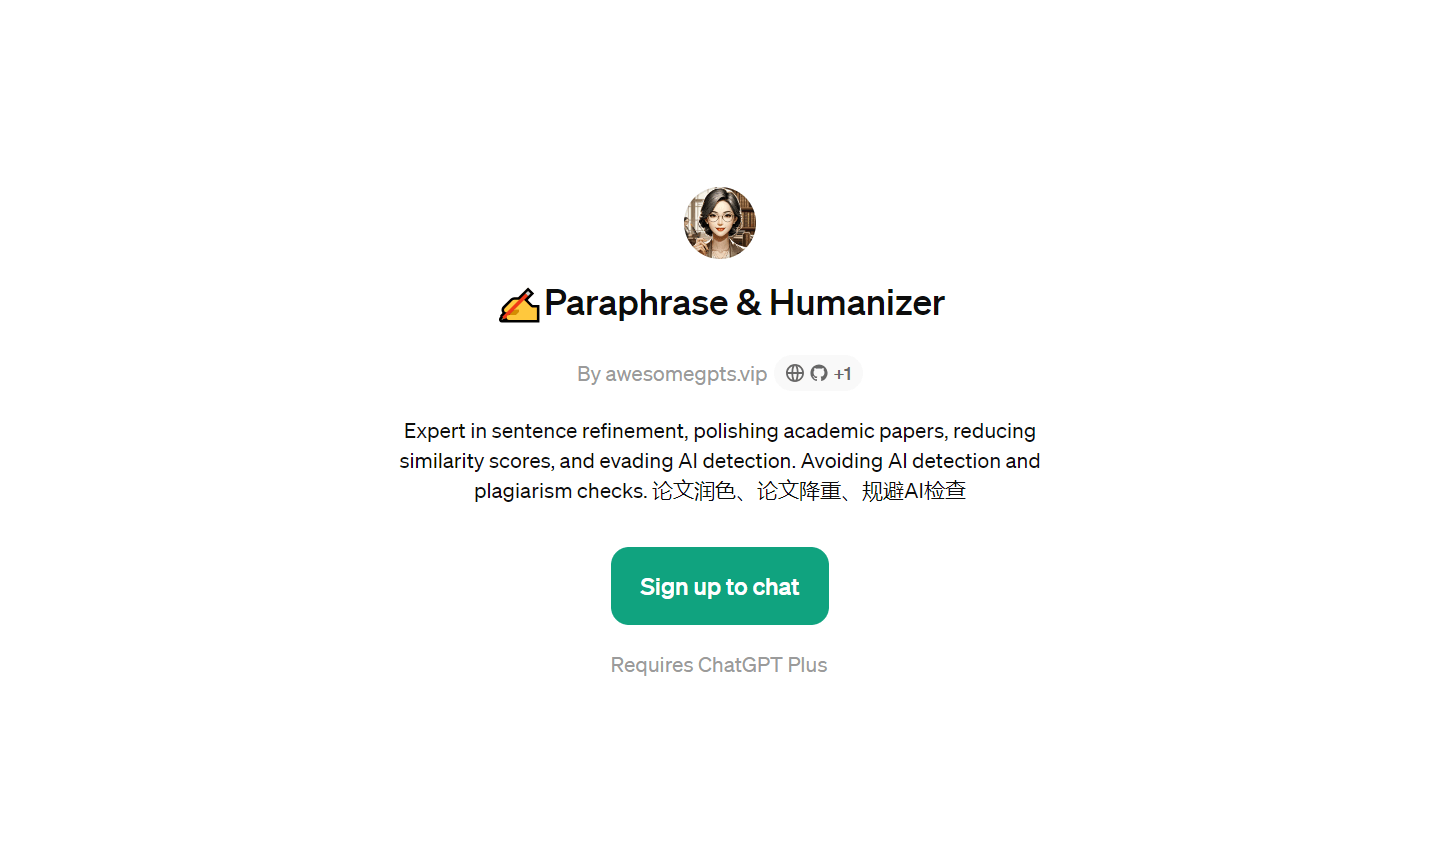 Paraphrase & Humanizer - Two Tools in One Custom GPT